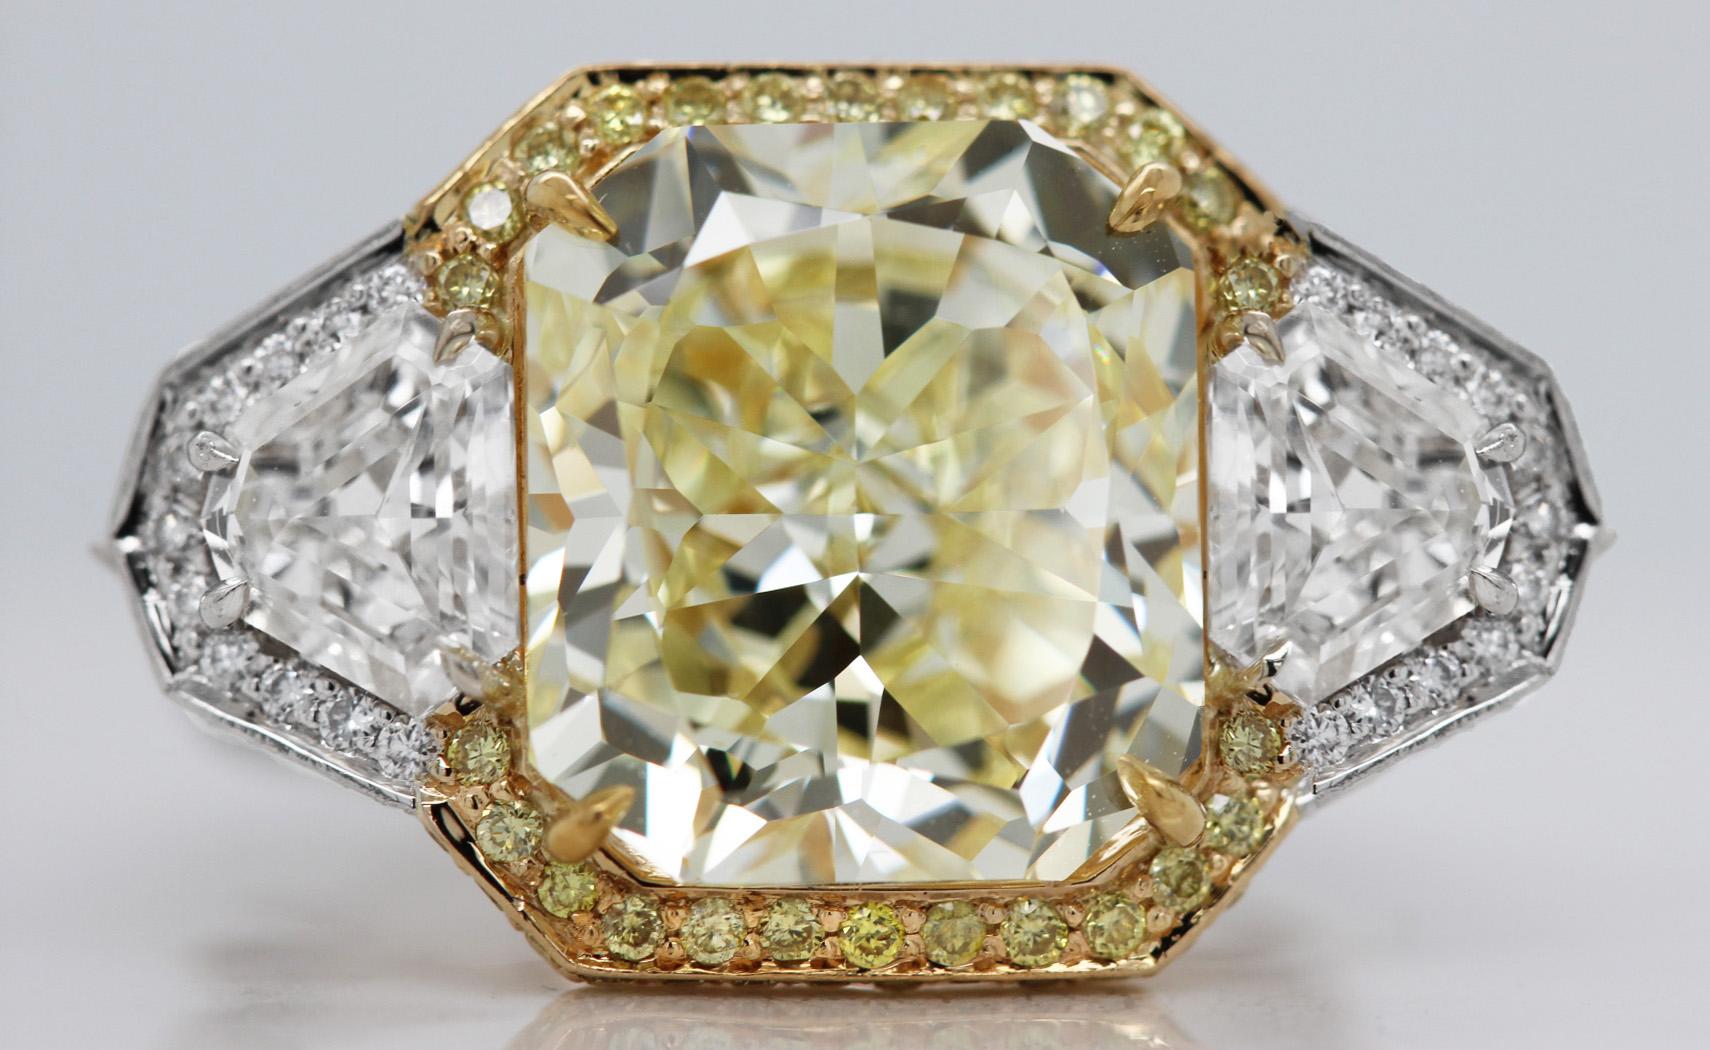 A true show stopper – this art-deco inspired ring features a gorgeous 7.13 carat natural, fancy yellow radiant-cut diamond. Sidled by two white trapezoid-cut diamonds (1.00 TCW), adding to the geometrical look. The overall “clean” look of the ring